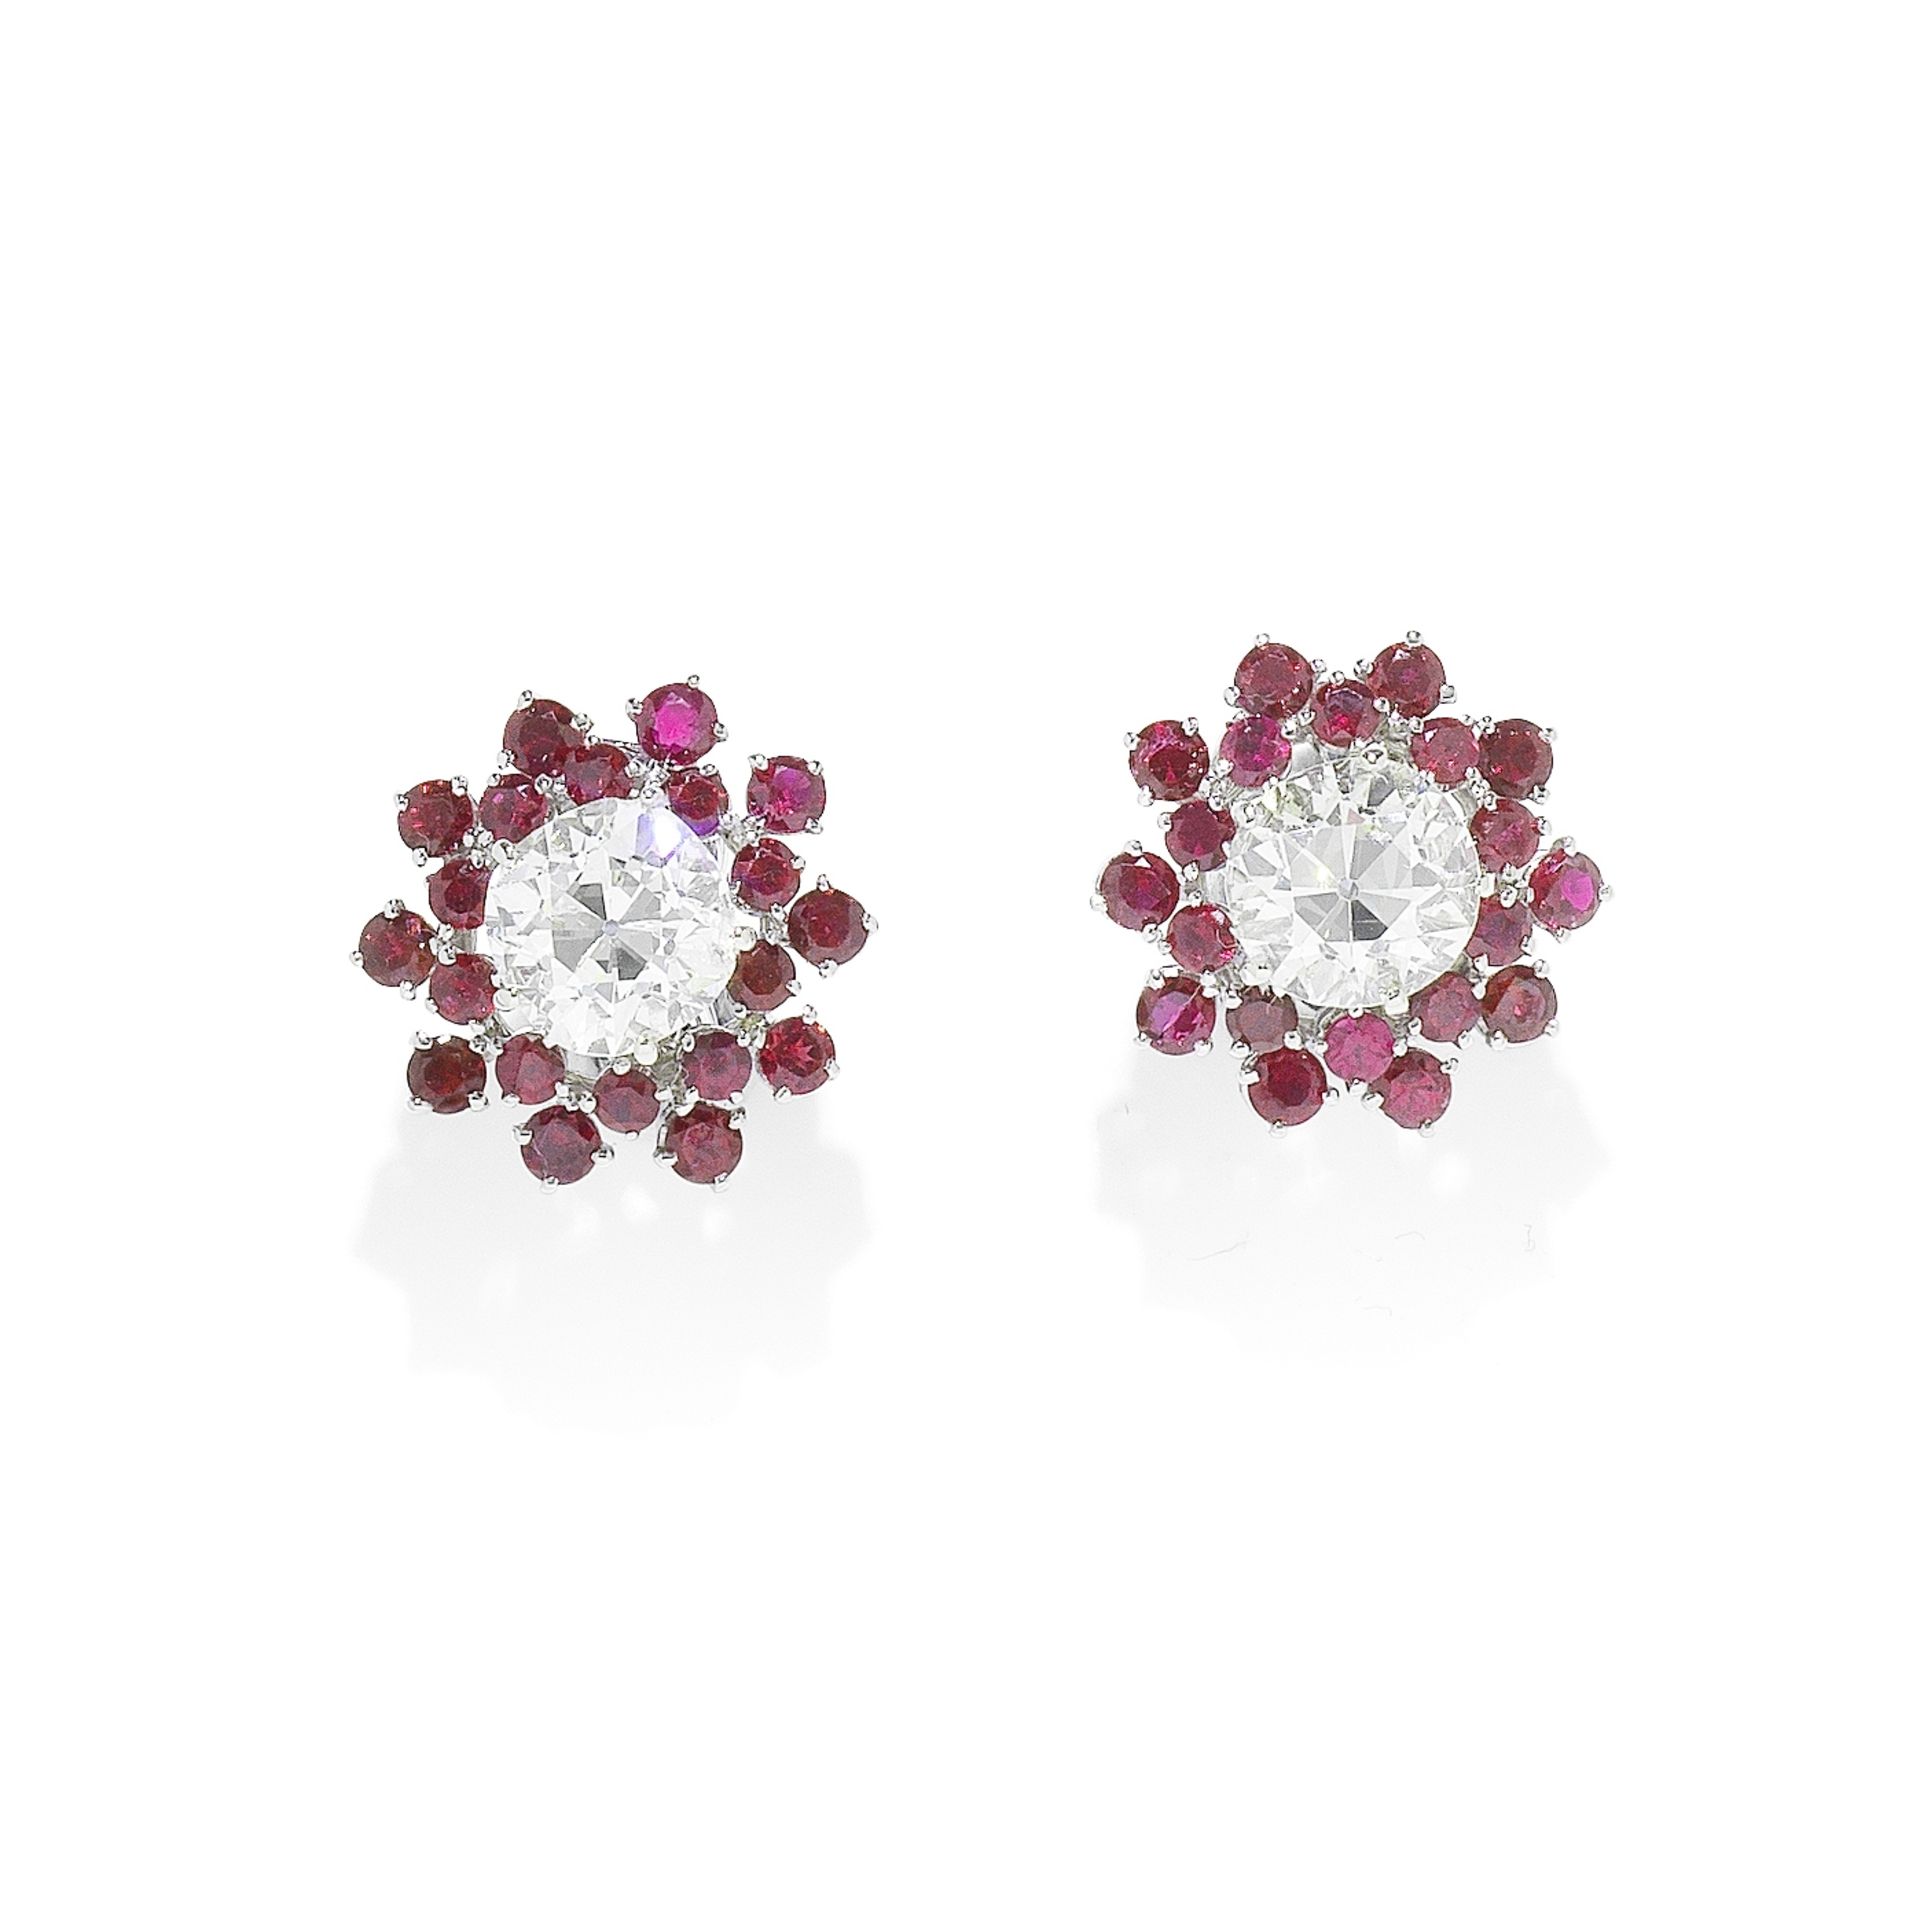 A PAIR OF RUBY AND DIAMOND EARCLIPS, BY NANNINI